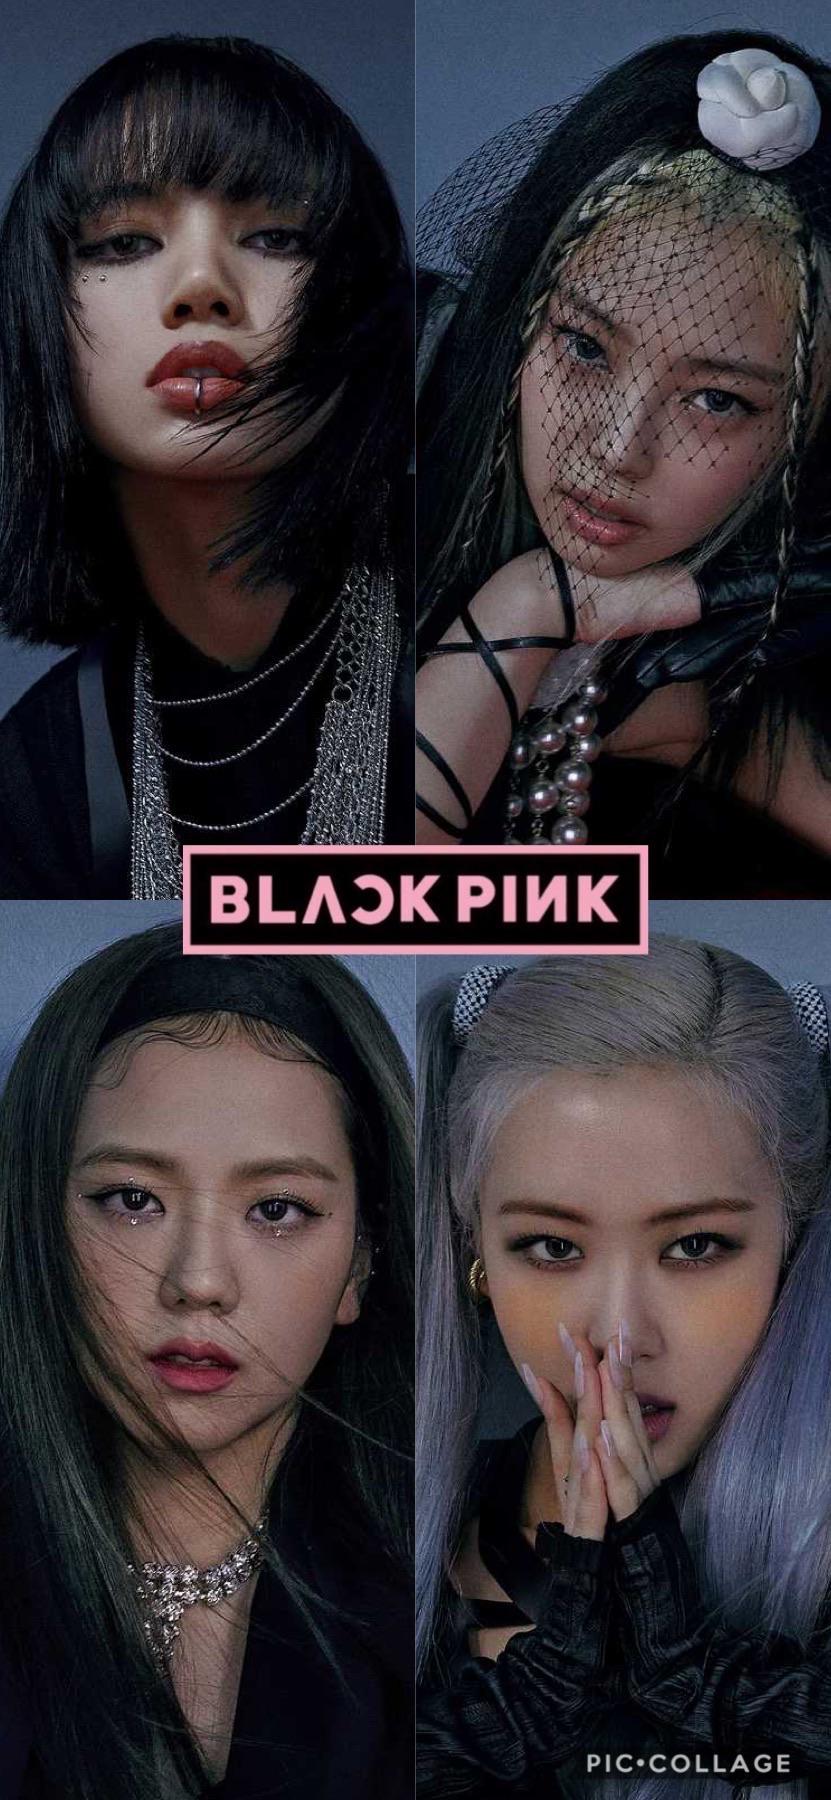  Blackpink  How You  Like  That Wallpapers  Wallpaper  Cave